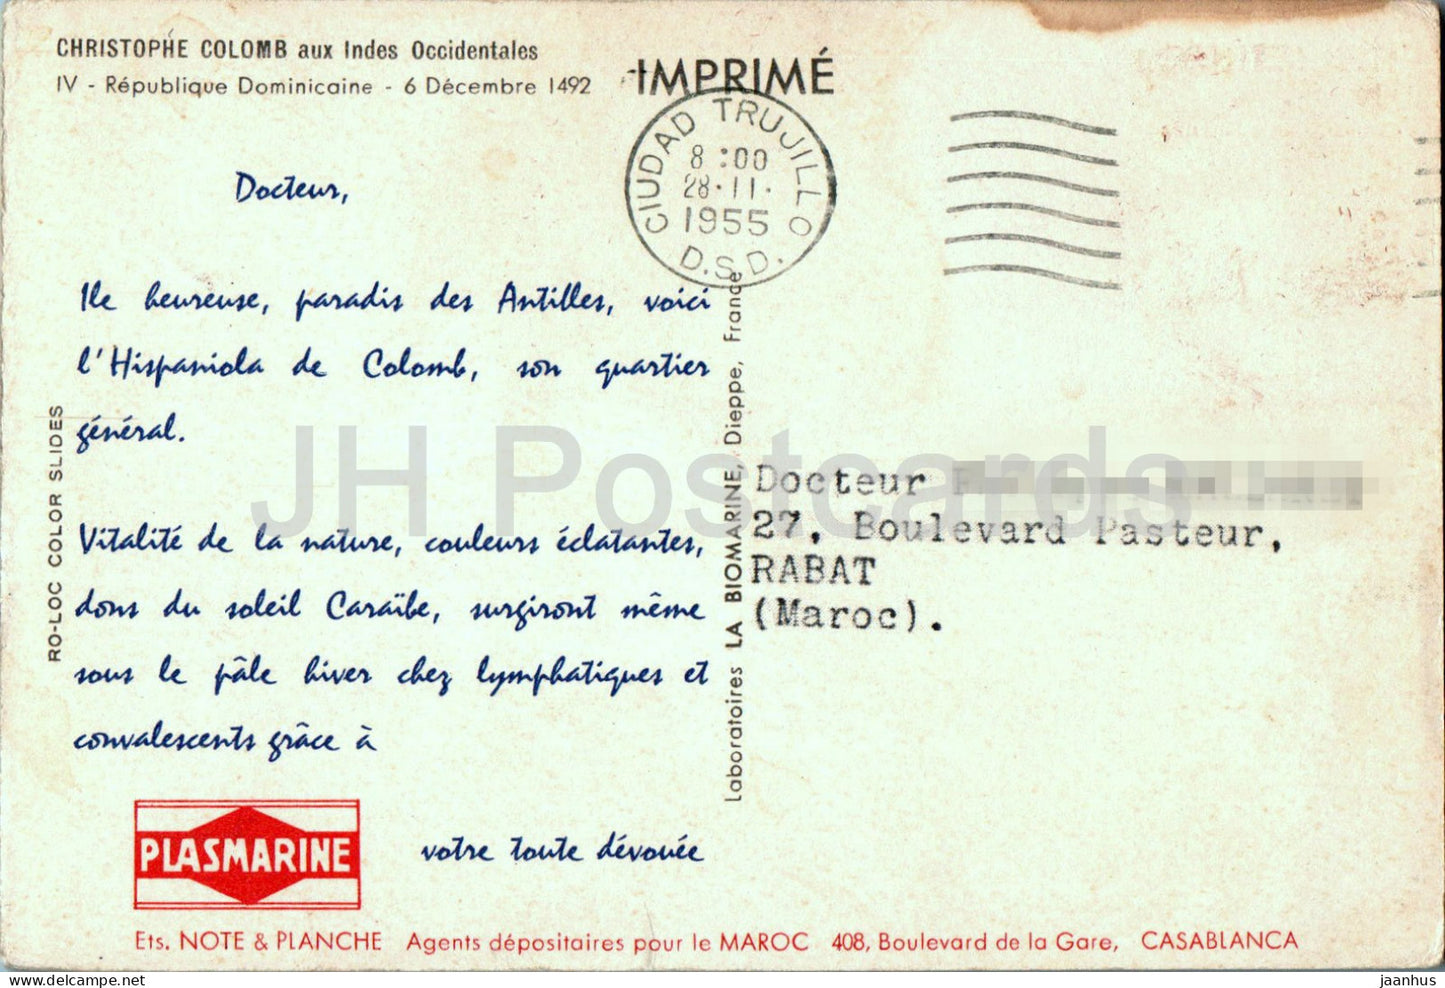 Christophe Colomb aux Indes Occidentales - Plasmarine - old postcard - 1955 - Dominican Republic - used